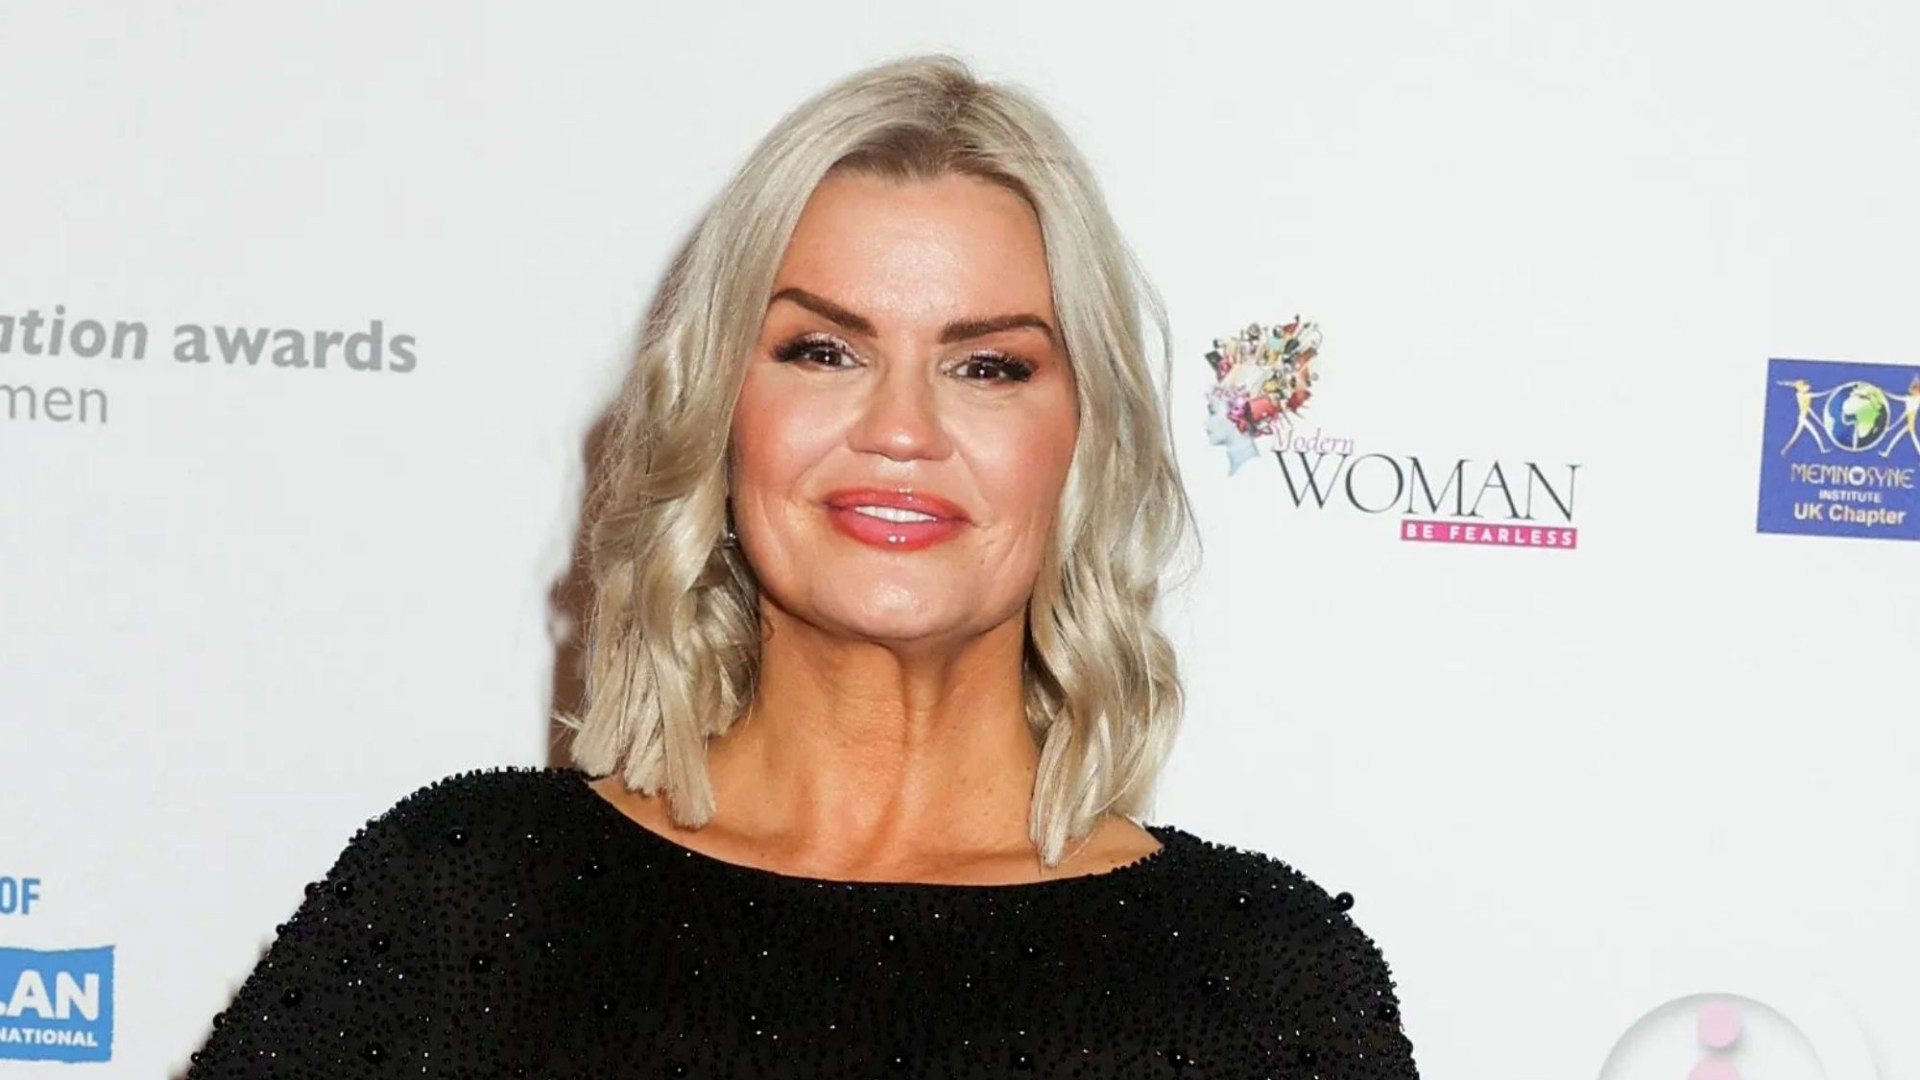 Kerry Katona poses in strapless dresses after four stone weight loss – but fans are distracted by shameful detail [Video]